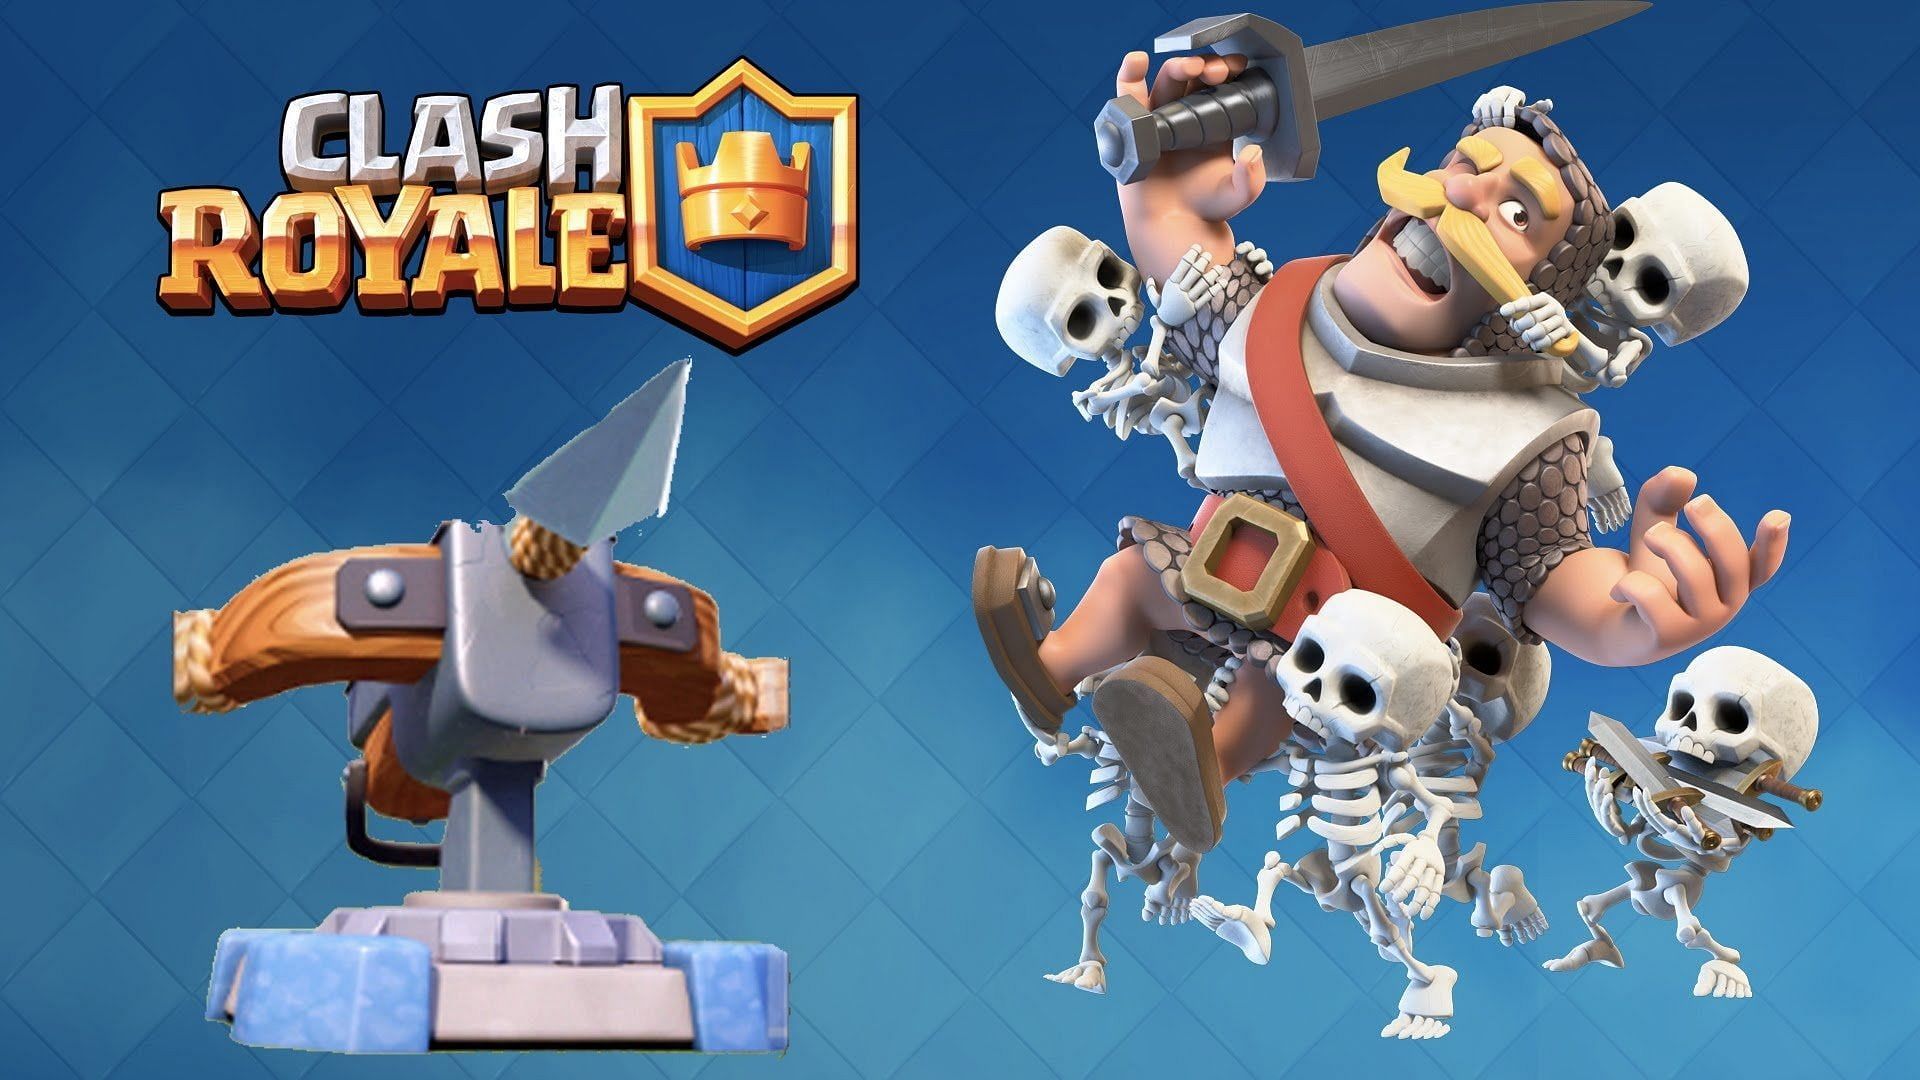 Clash Royale Wallpaper Discover more Clash Royale, Multiplayer